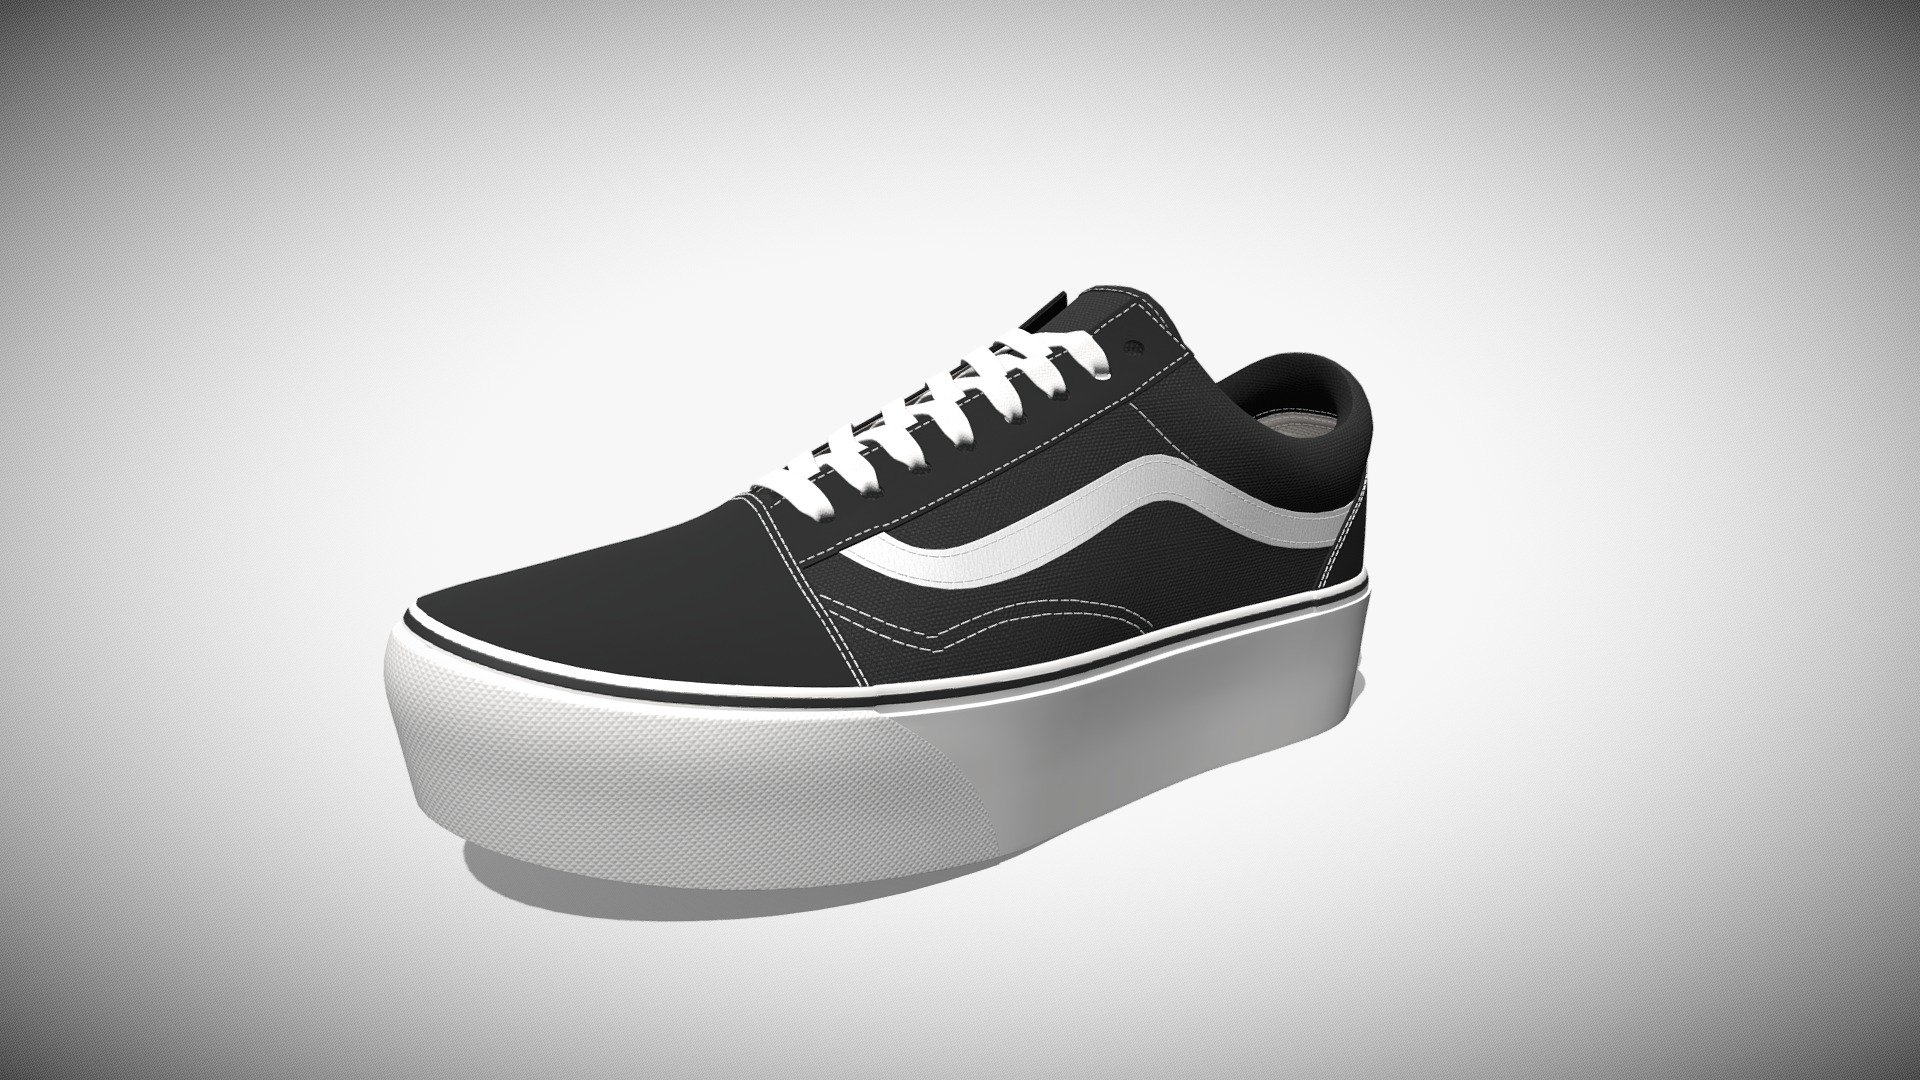 Detailed 3D model of a pair of Black And White Vans Old Skool Stackform sneakers, modeled in Cinema 4D. The model was created using approximate real world dimensions.

The model has 292,224 polys and 307,276 vertices.

An additional file has been provided containing the original Cinema 4D project file with both standard and v-ray materials, textures and other 3d format such as 3ds, fbx and obj. These files contain both the left and right pair of the shoes 3d model